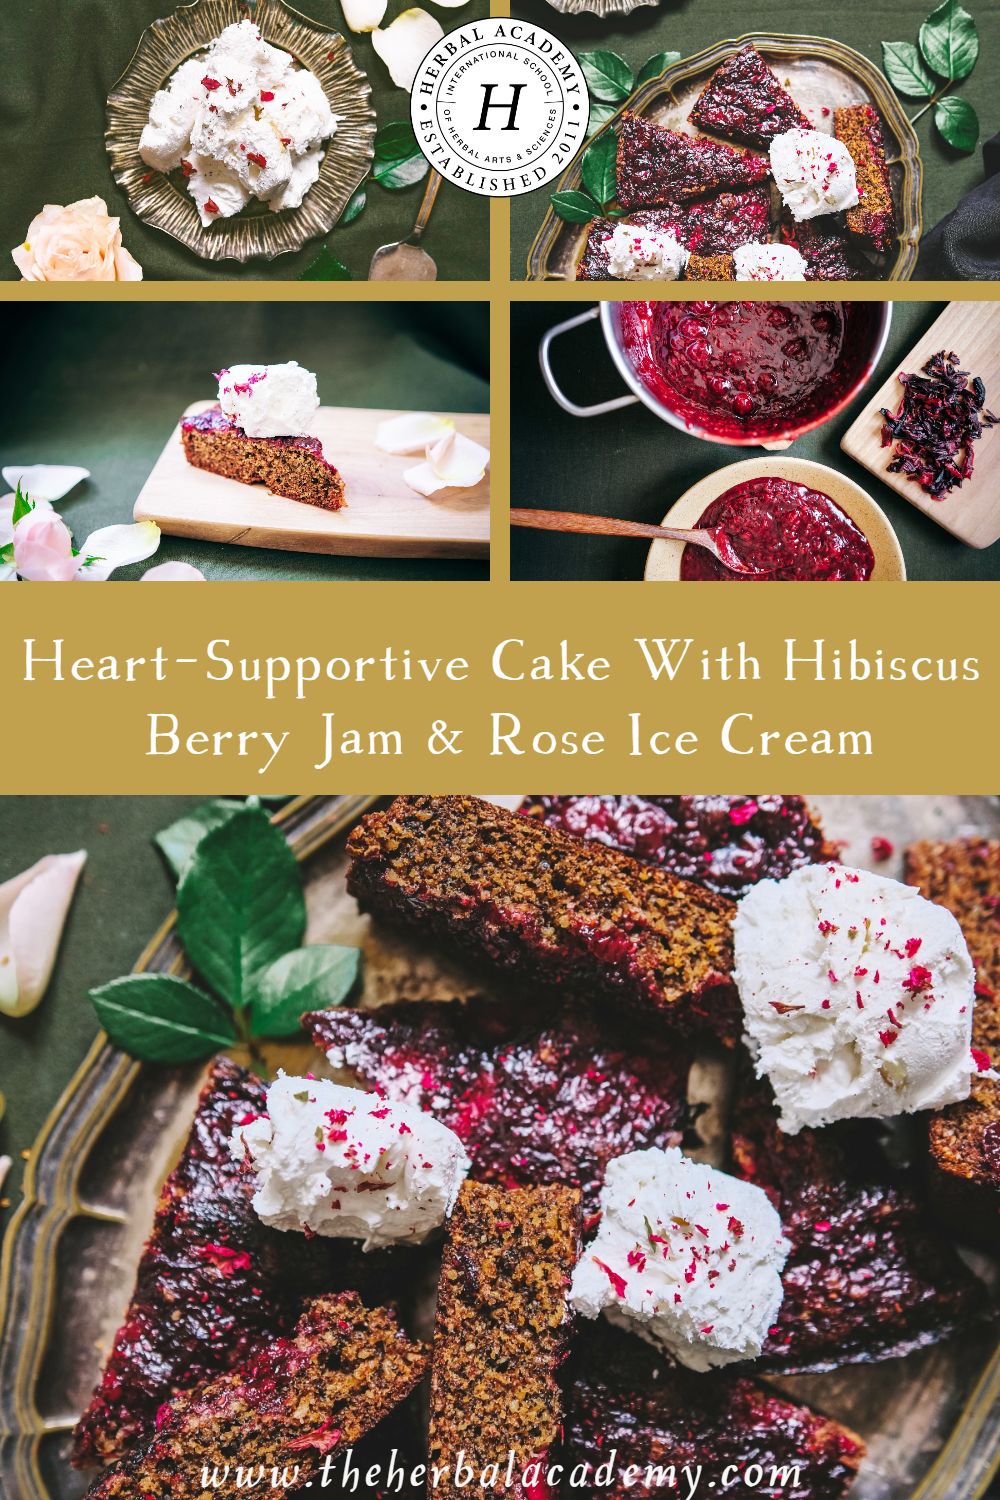 Heart-Supportive Cake with Hibiscus Berry Jam & Rose Ice Cream | Herbal Academy | This recipe is a wholesome cake with the walnut as its main ingredient, topped with a hibiscus and berry jam, and served with rose ice cream.